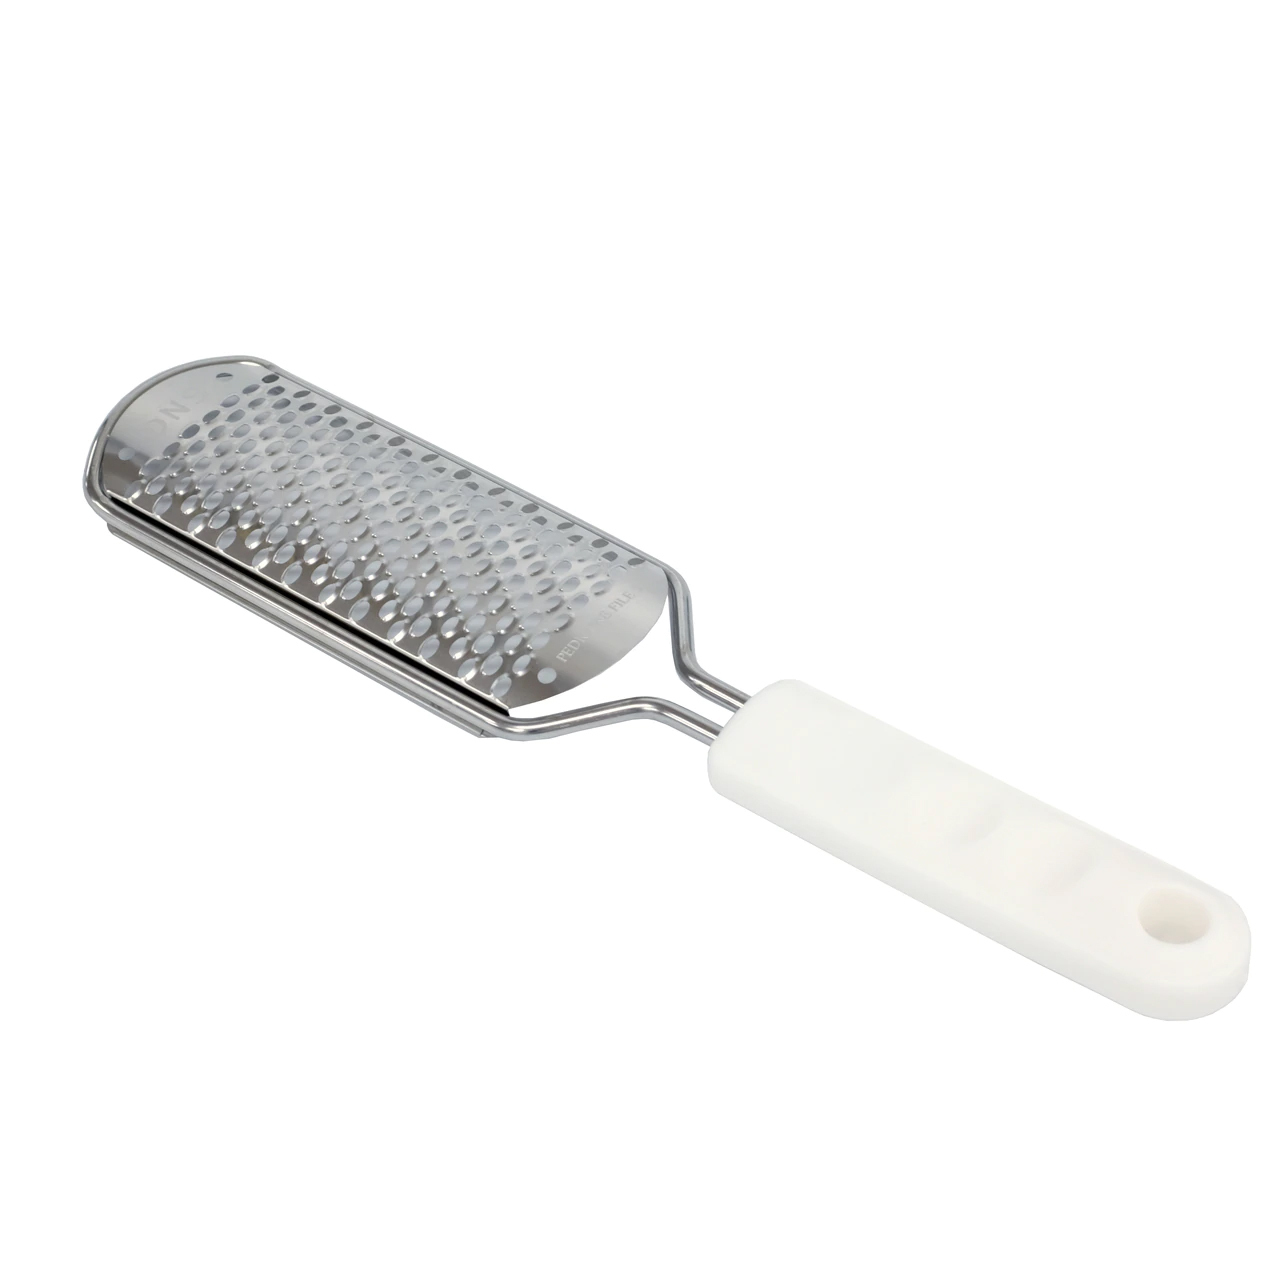 AVOID CHEESE GRATER TYPE CALLUS REMOVERS